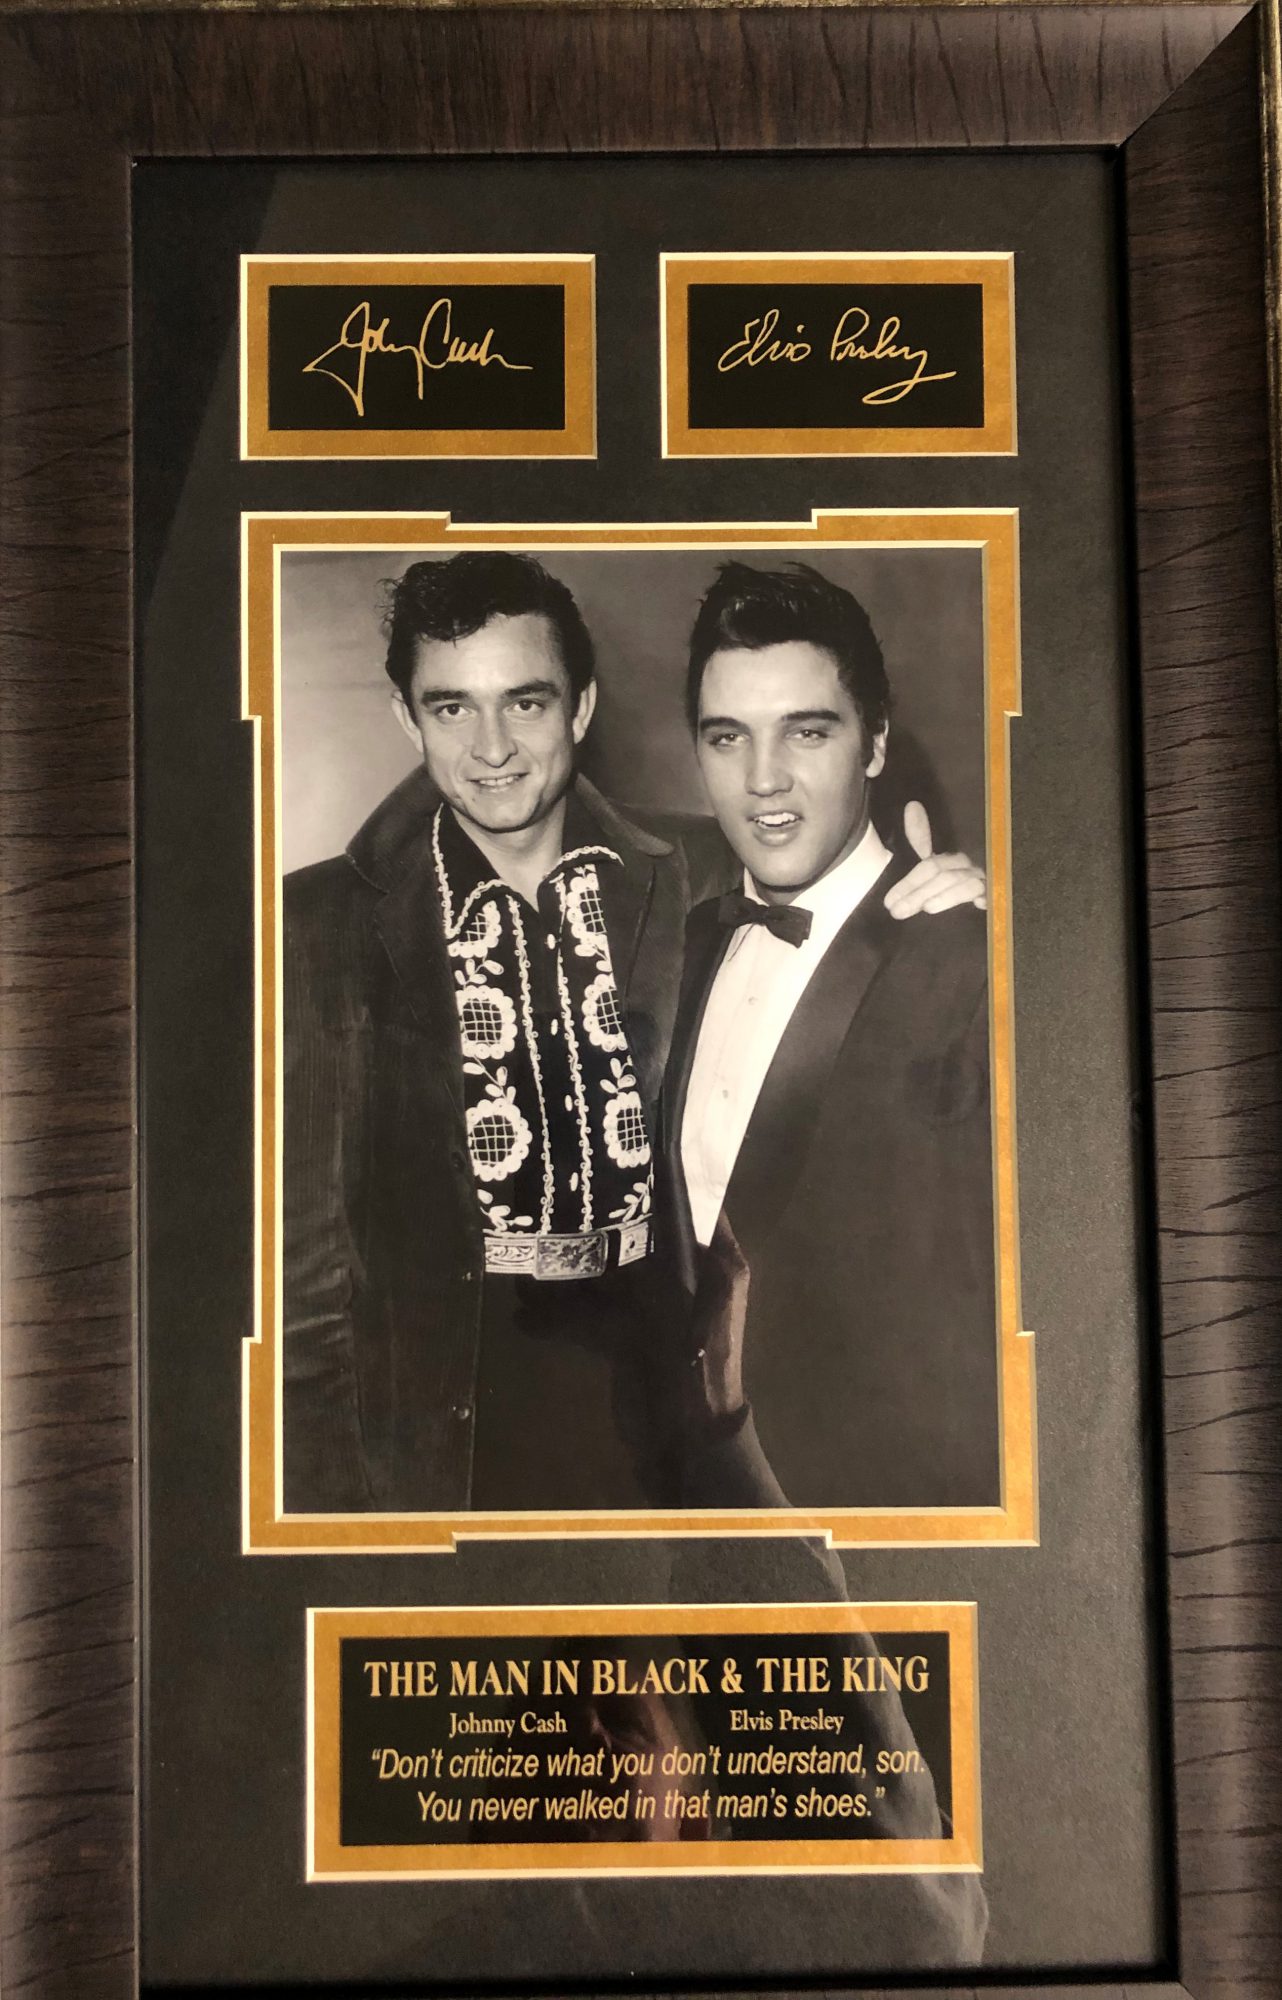 Cash and Elvis